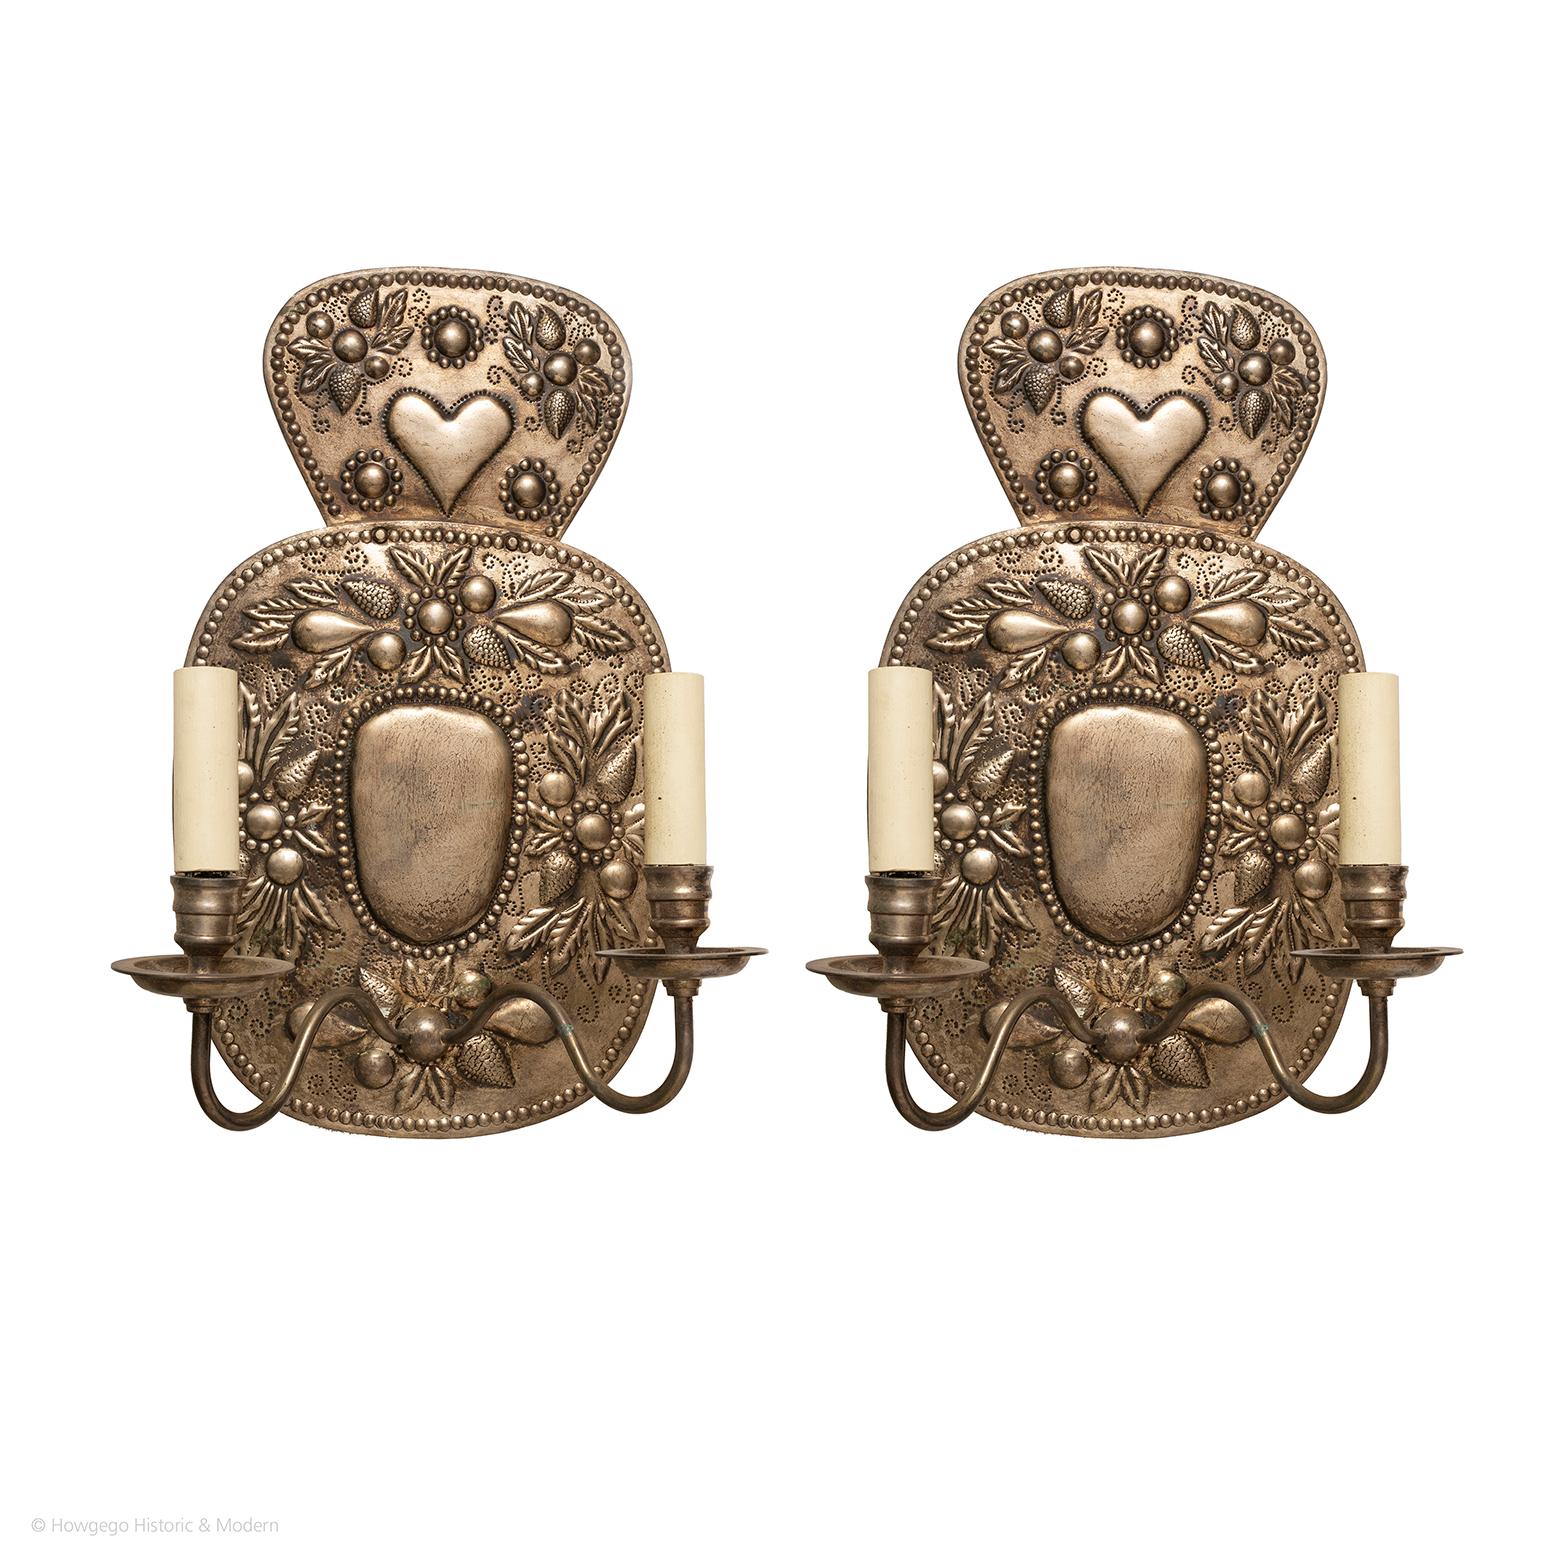 A charming pair of silvered, Repousse, wall sconces with heart motif Crestings each with two arms

- Naïve charm with the heart motifs and stylised leaves and berries
- The silvered metal maximises the reflection of light 
They blend and sit